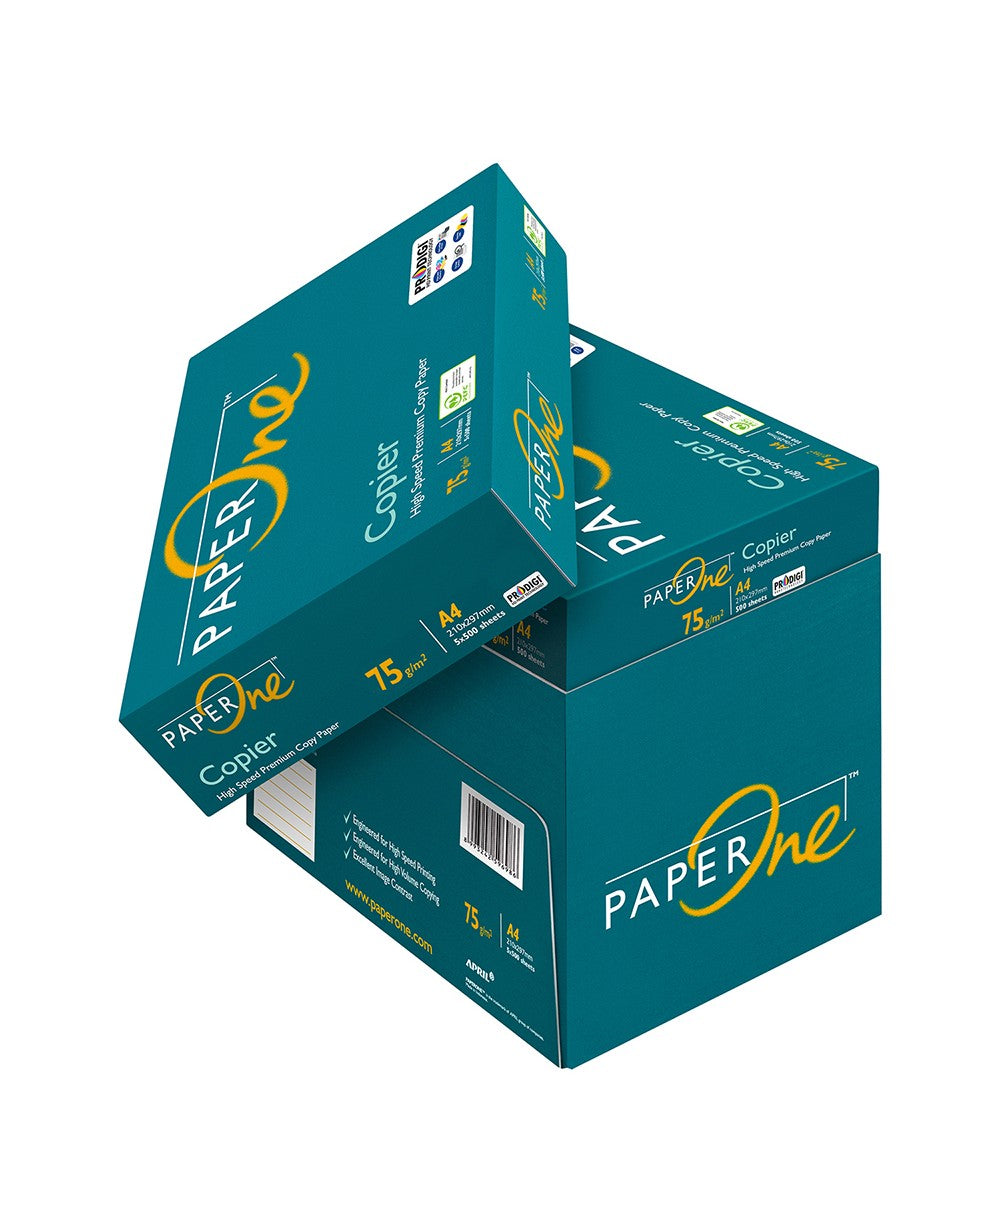 PaperOne A4 Copier Paper 75gsm - 500 Sheets - OfficePlus